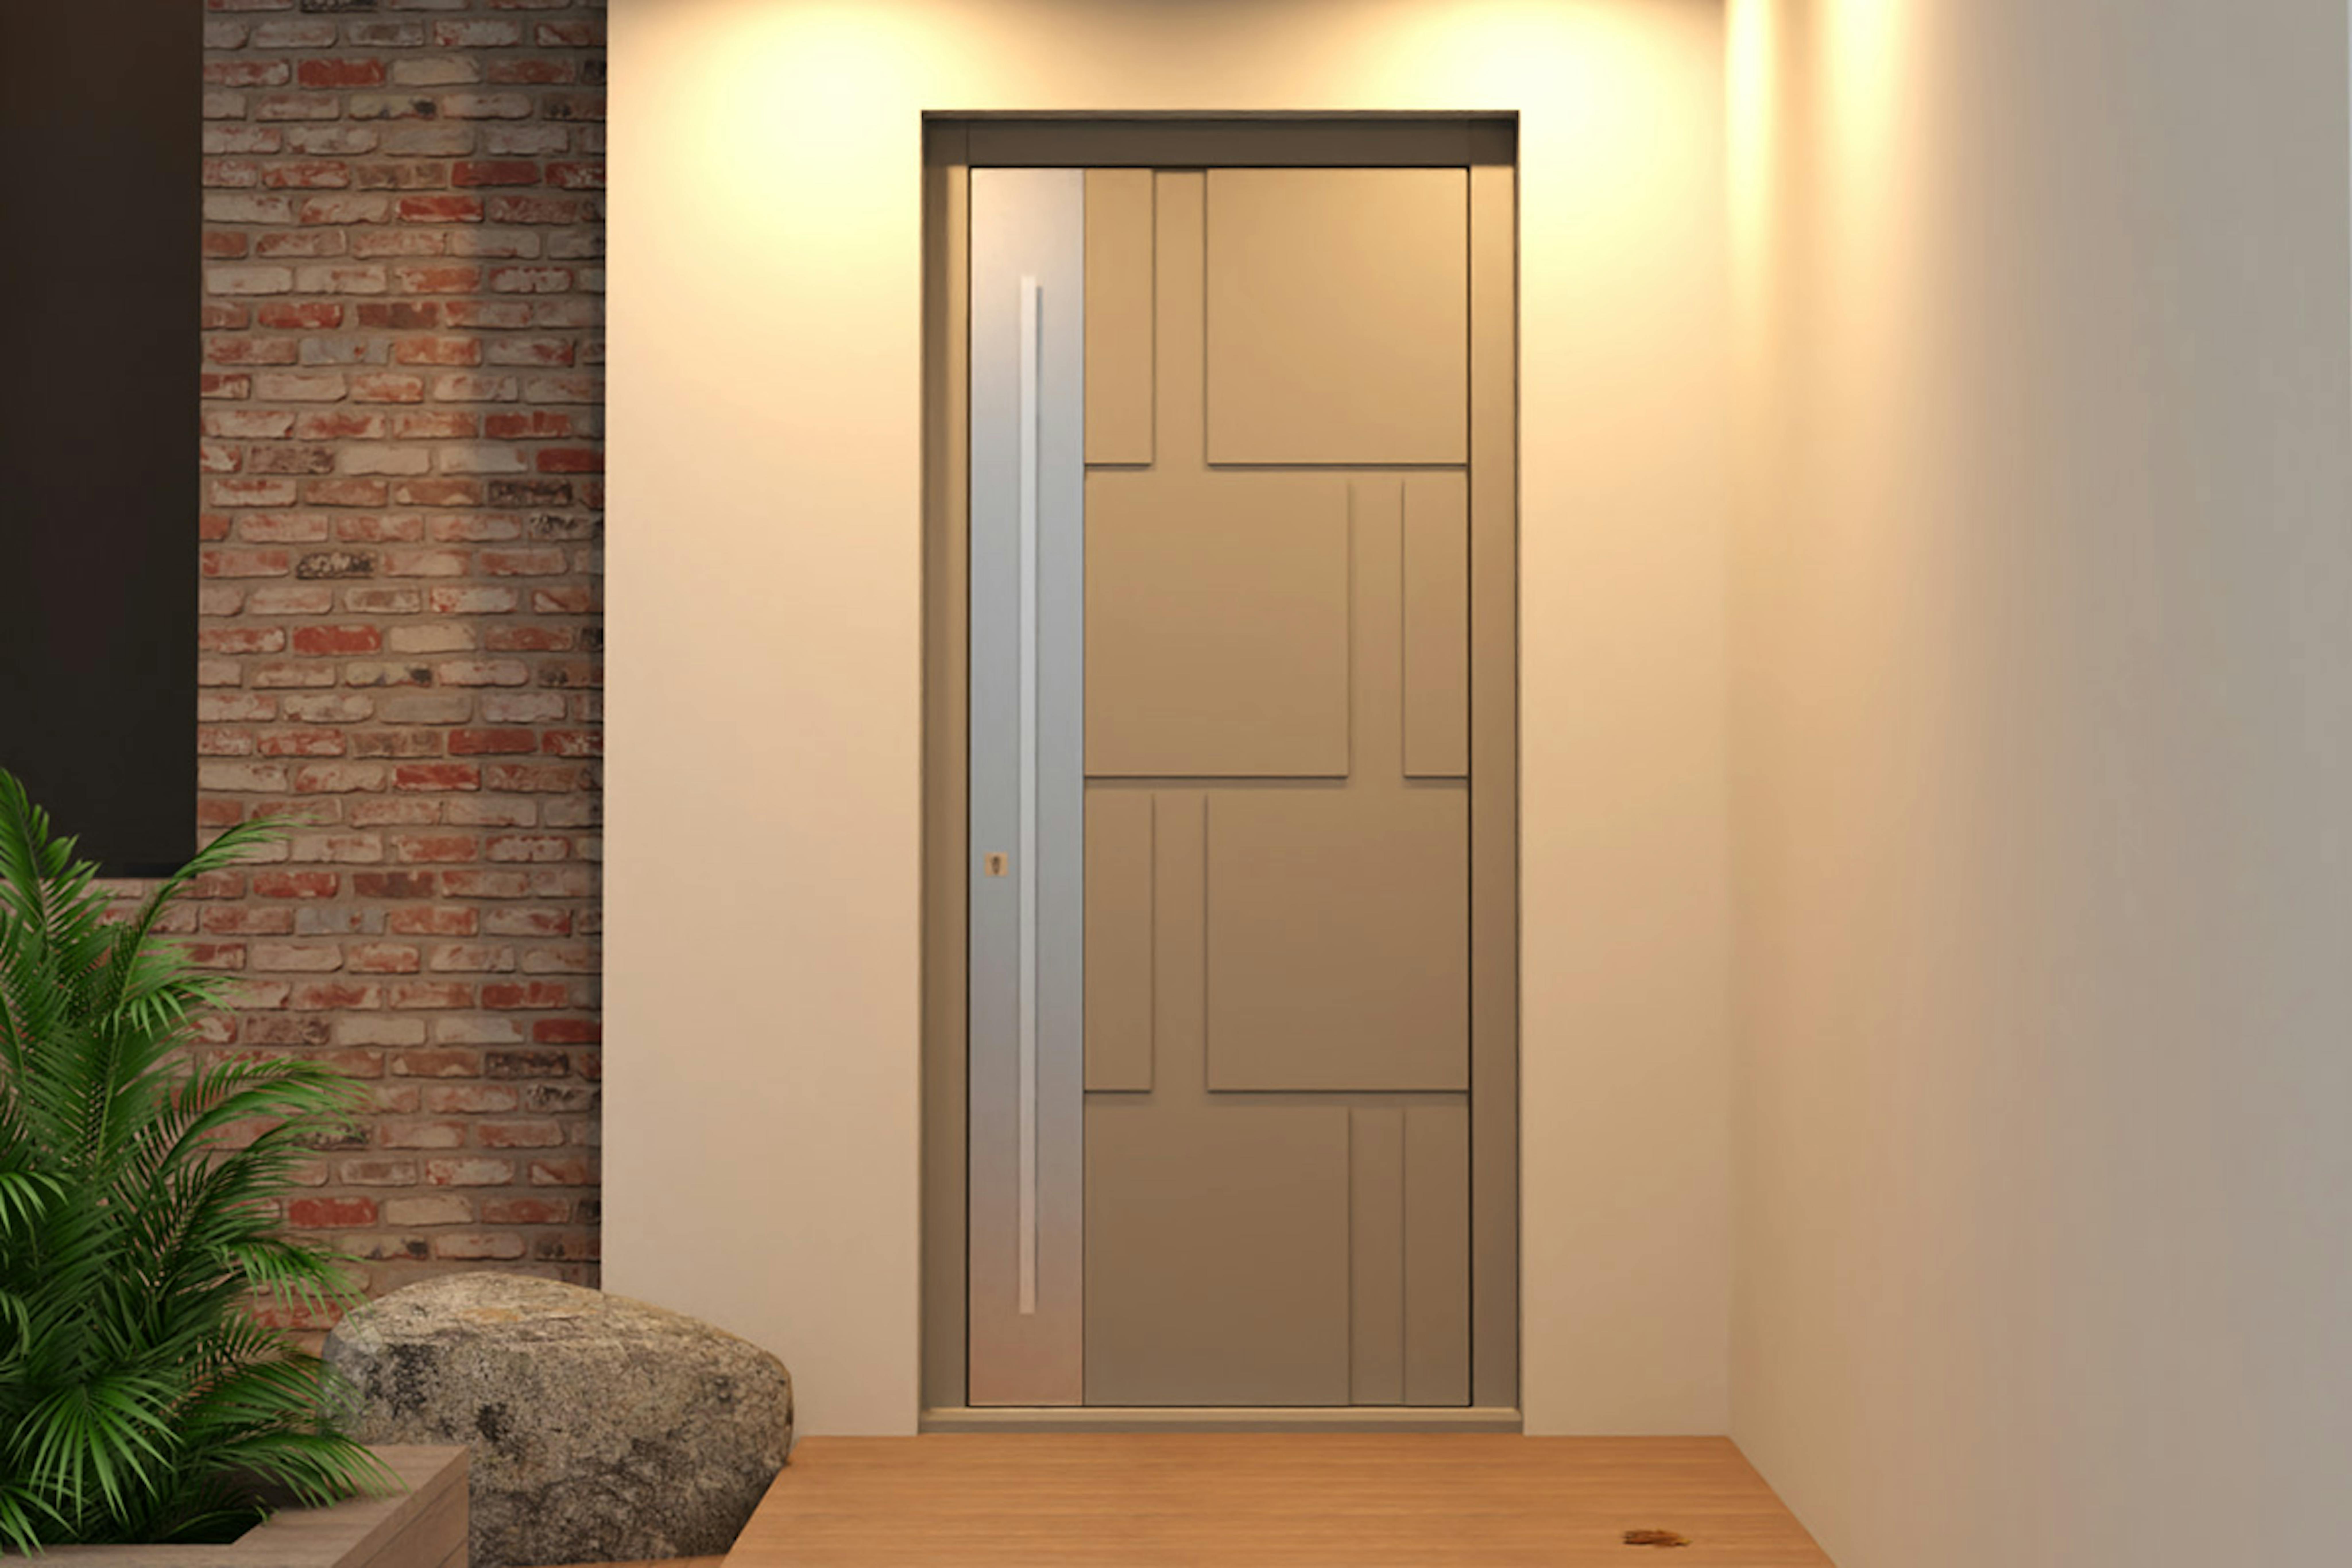 Deuren's bespoke front door set in Tegal S - square shapes arranged like bricks with a full height stainless steel strip t the left of the door, behind a long bar handle.